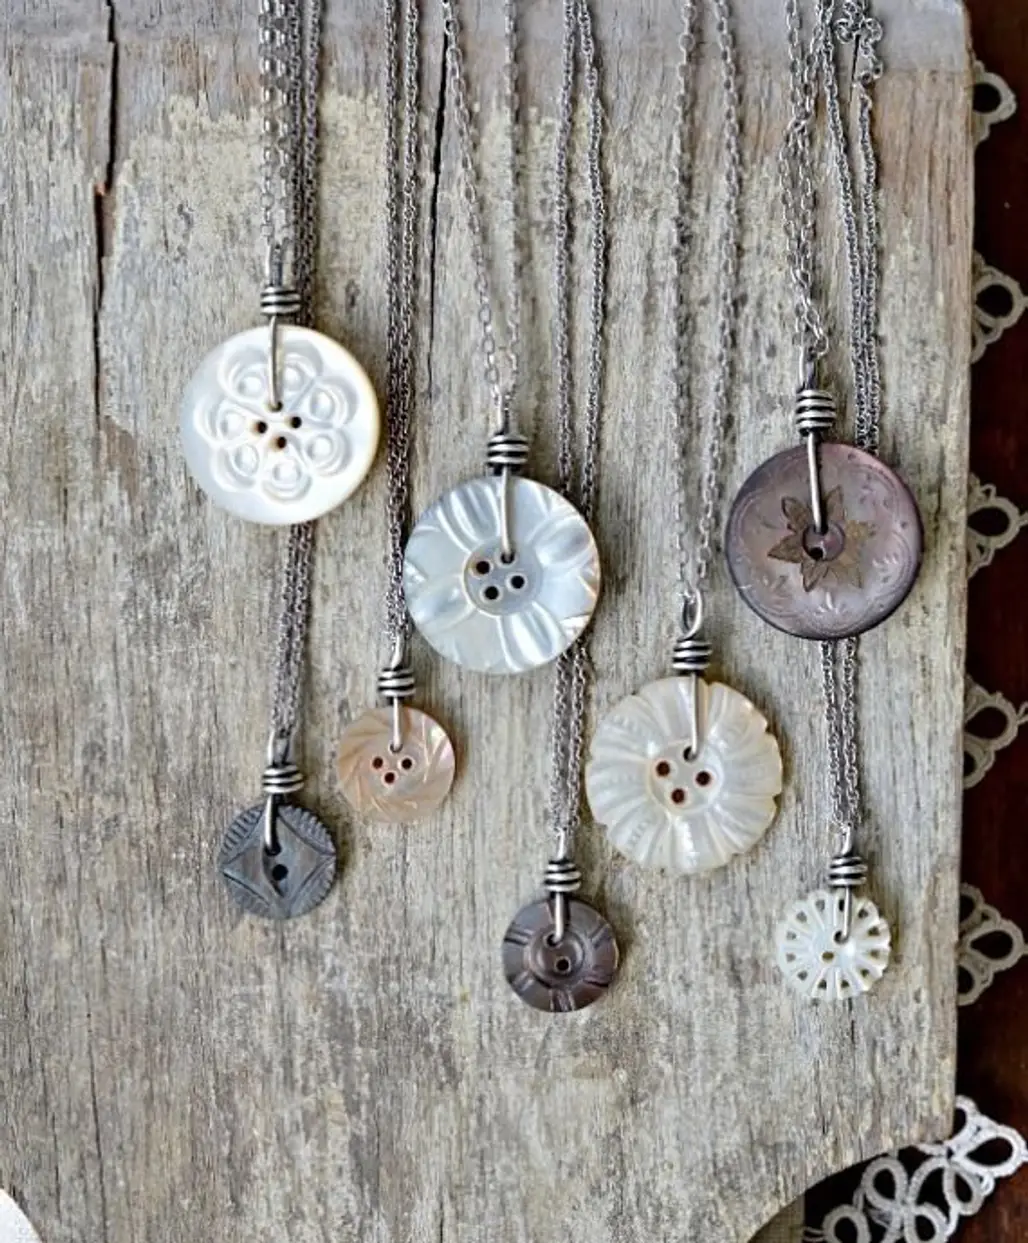 Make Wire Wrapped Pendants from Buttons